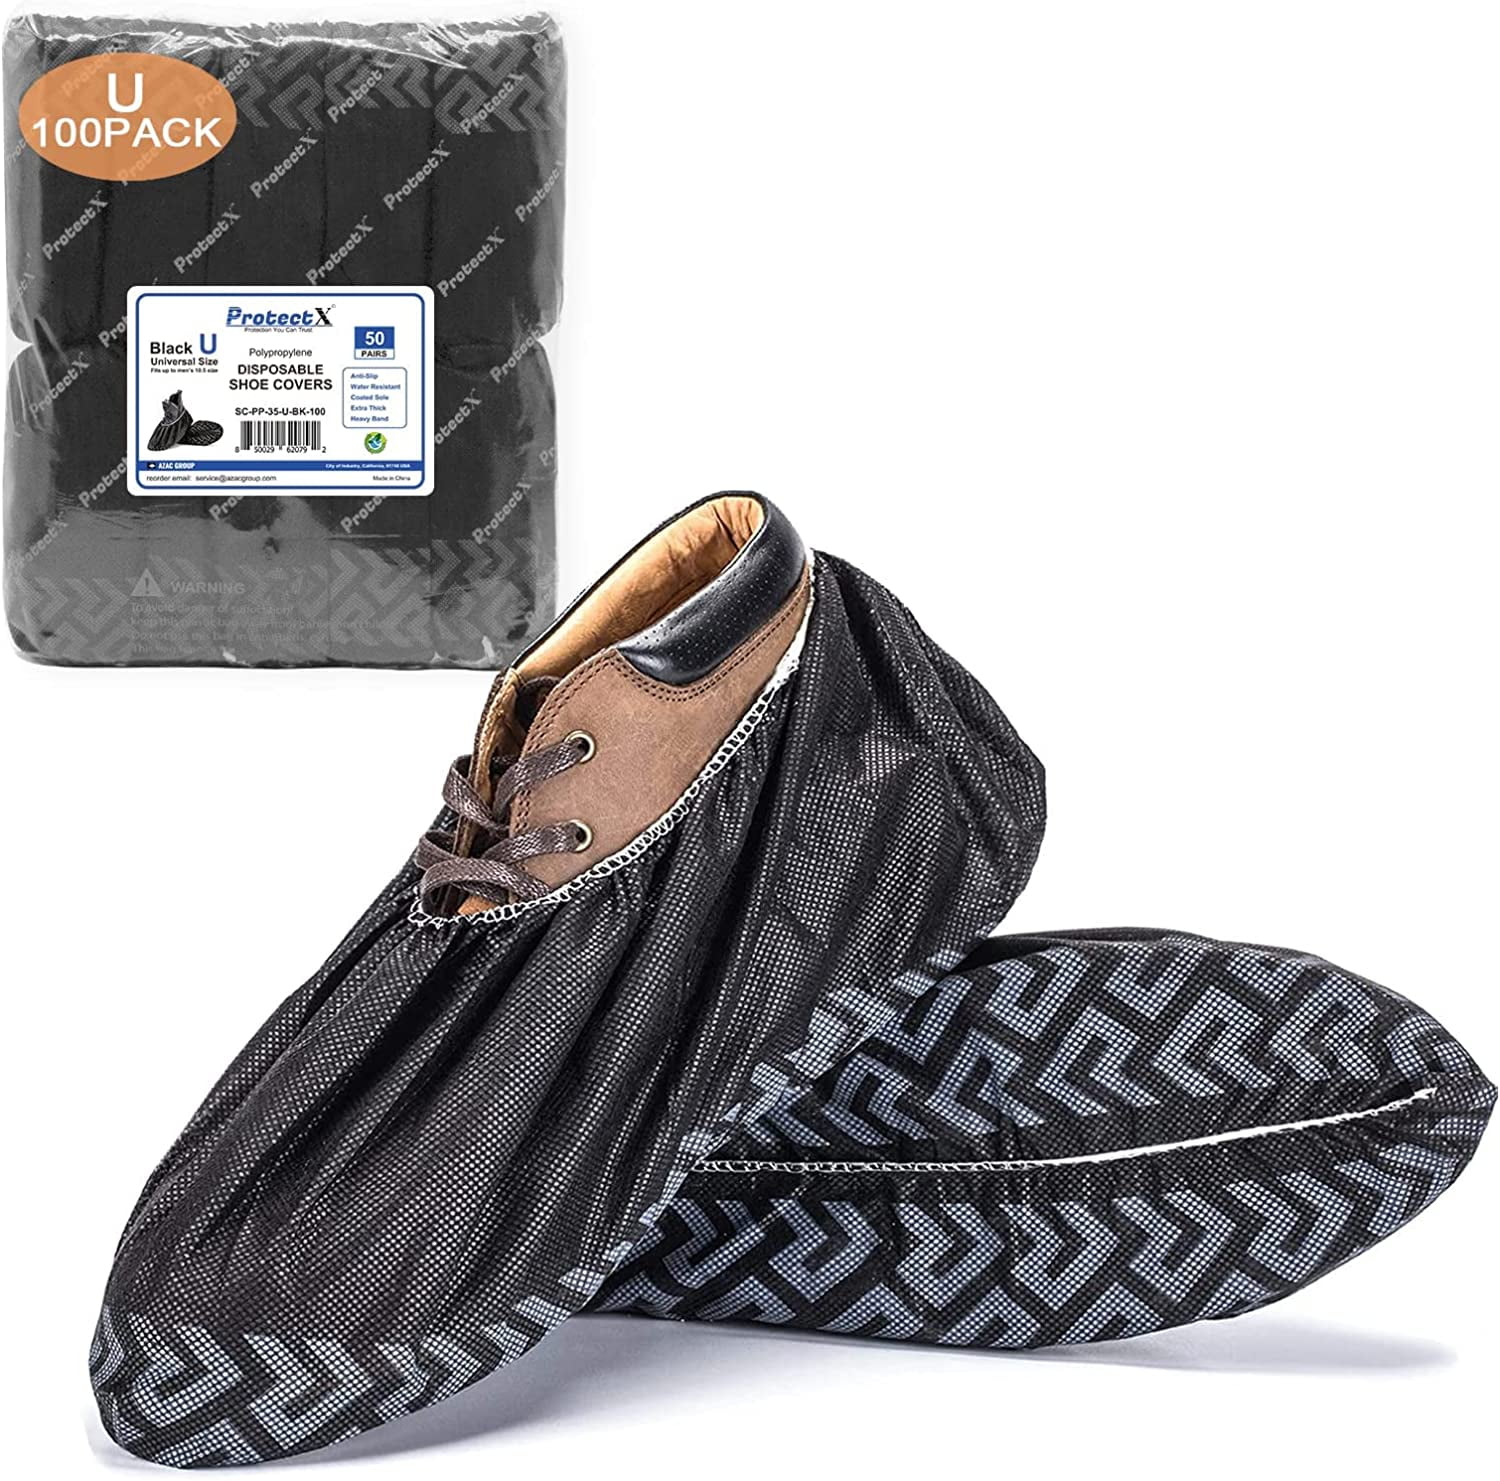 NOGIS Blue Shoe Covers Disposable,400G/100 Pack(50 Pairs) Non-Woven  Booties,Non-Slip,Durable Leakproof for Indoor/Outdoor, Protects  Carpets/Floors - One Size Fits Most 